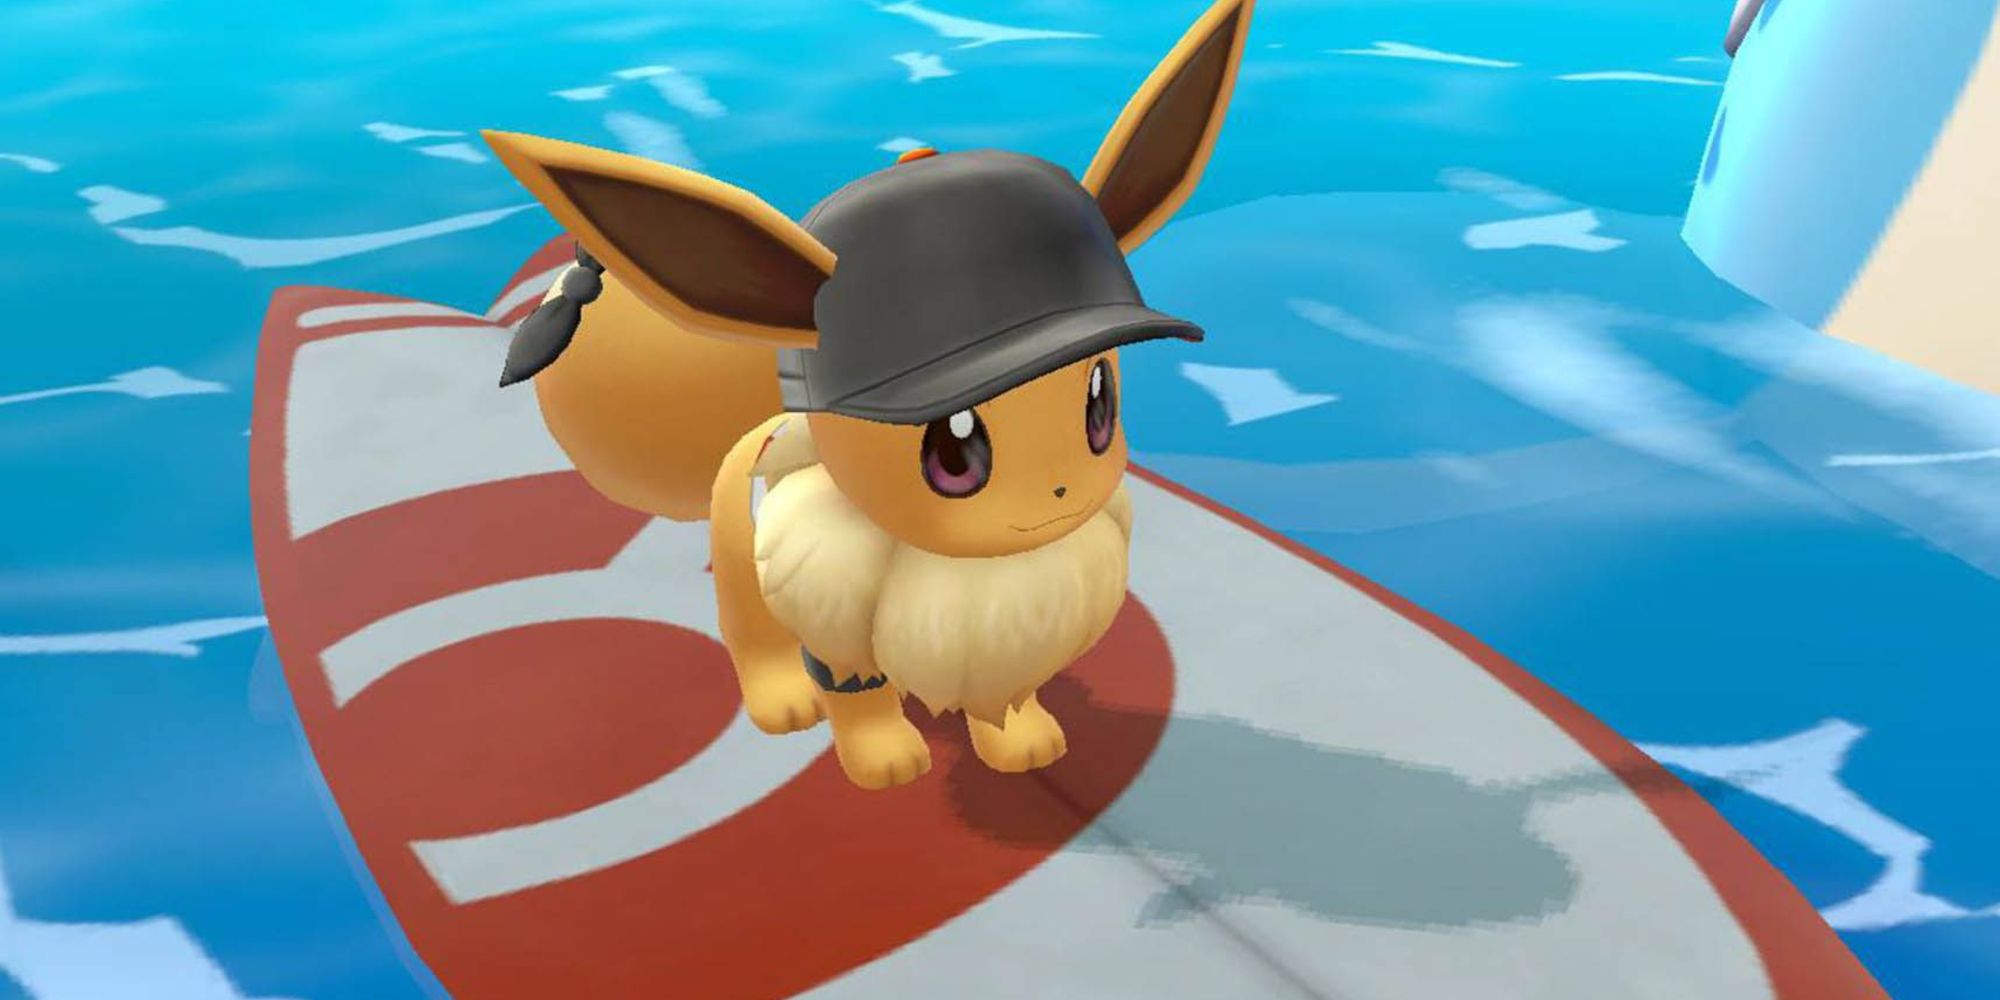 Eevee in a black hat, riding a surfboard with a black band on its arm